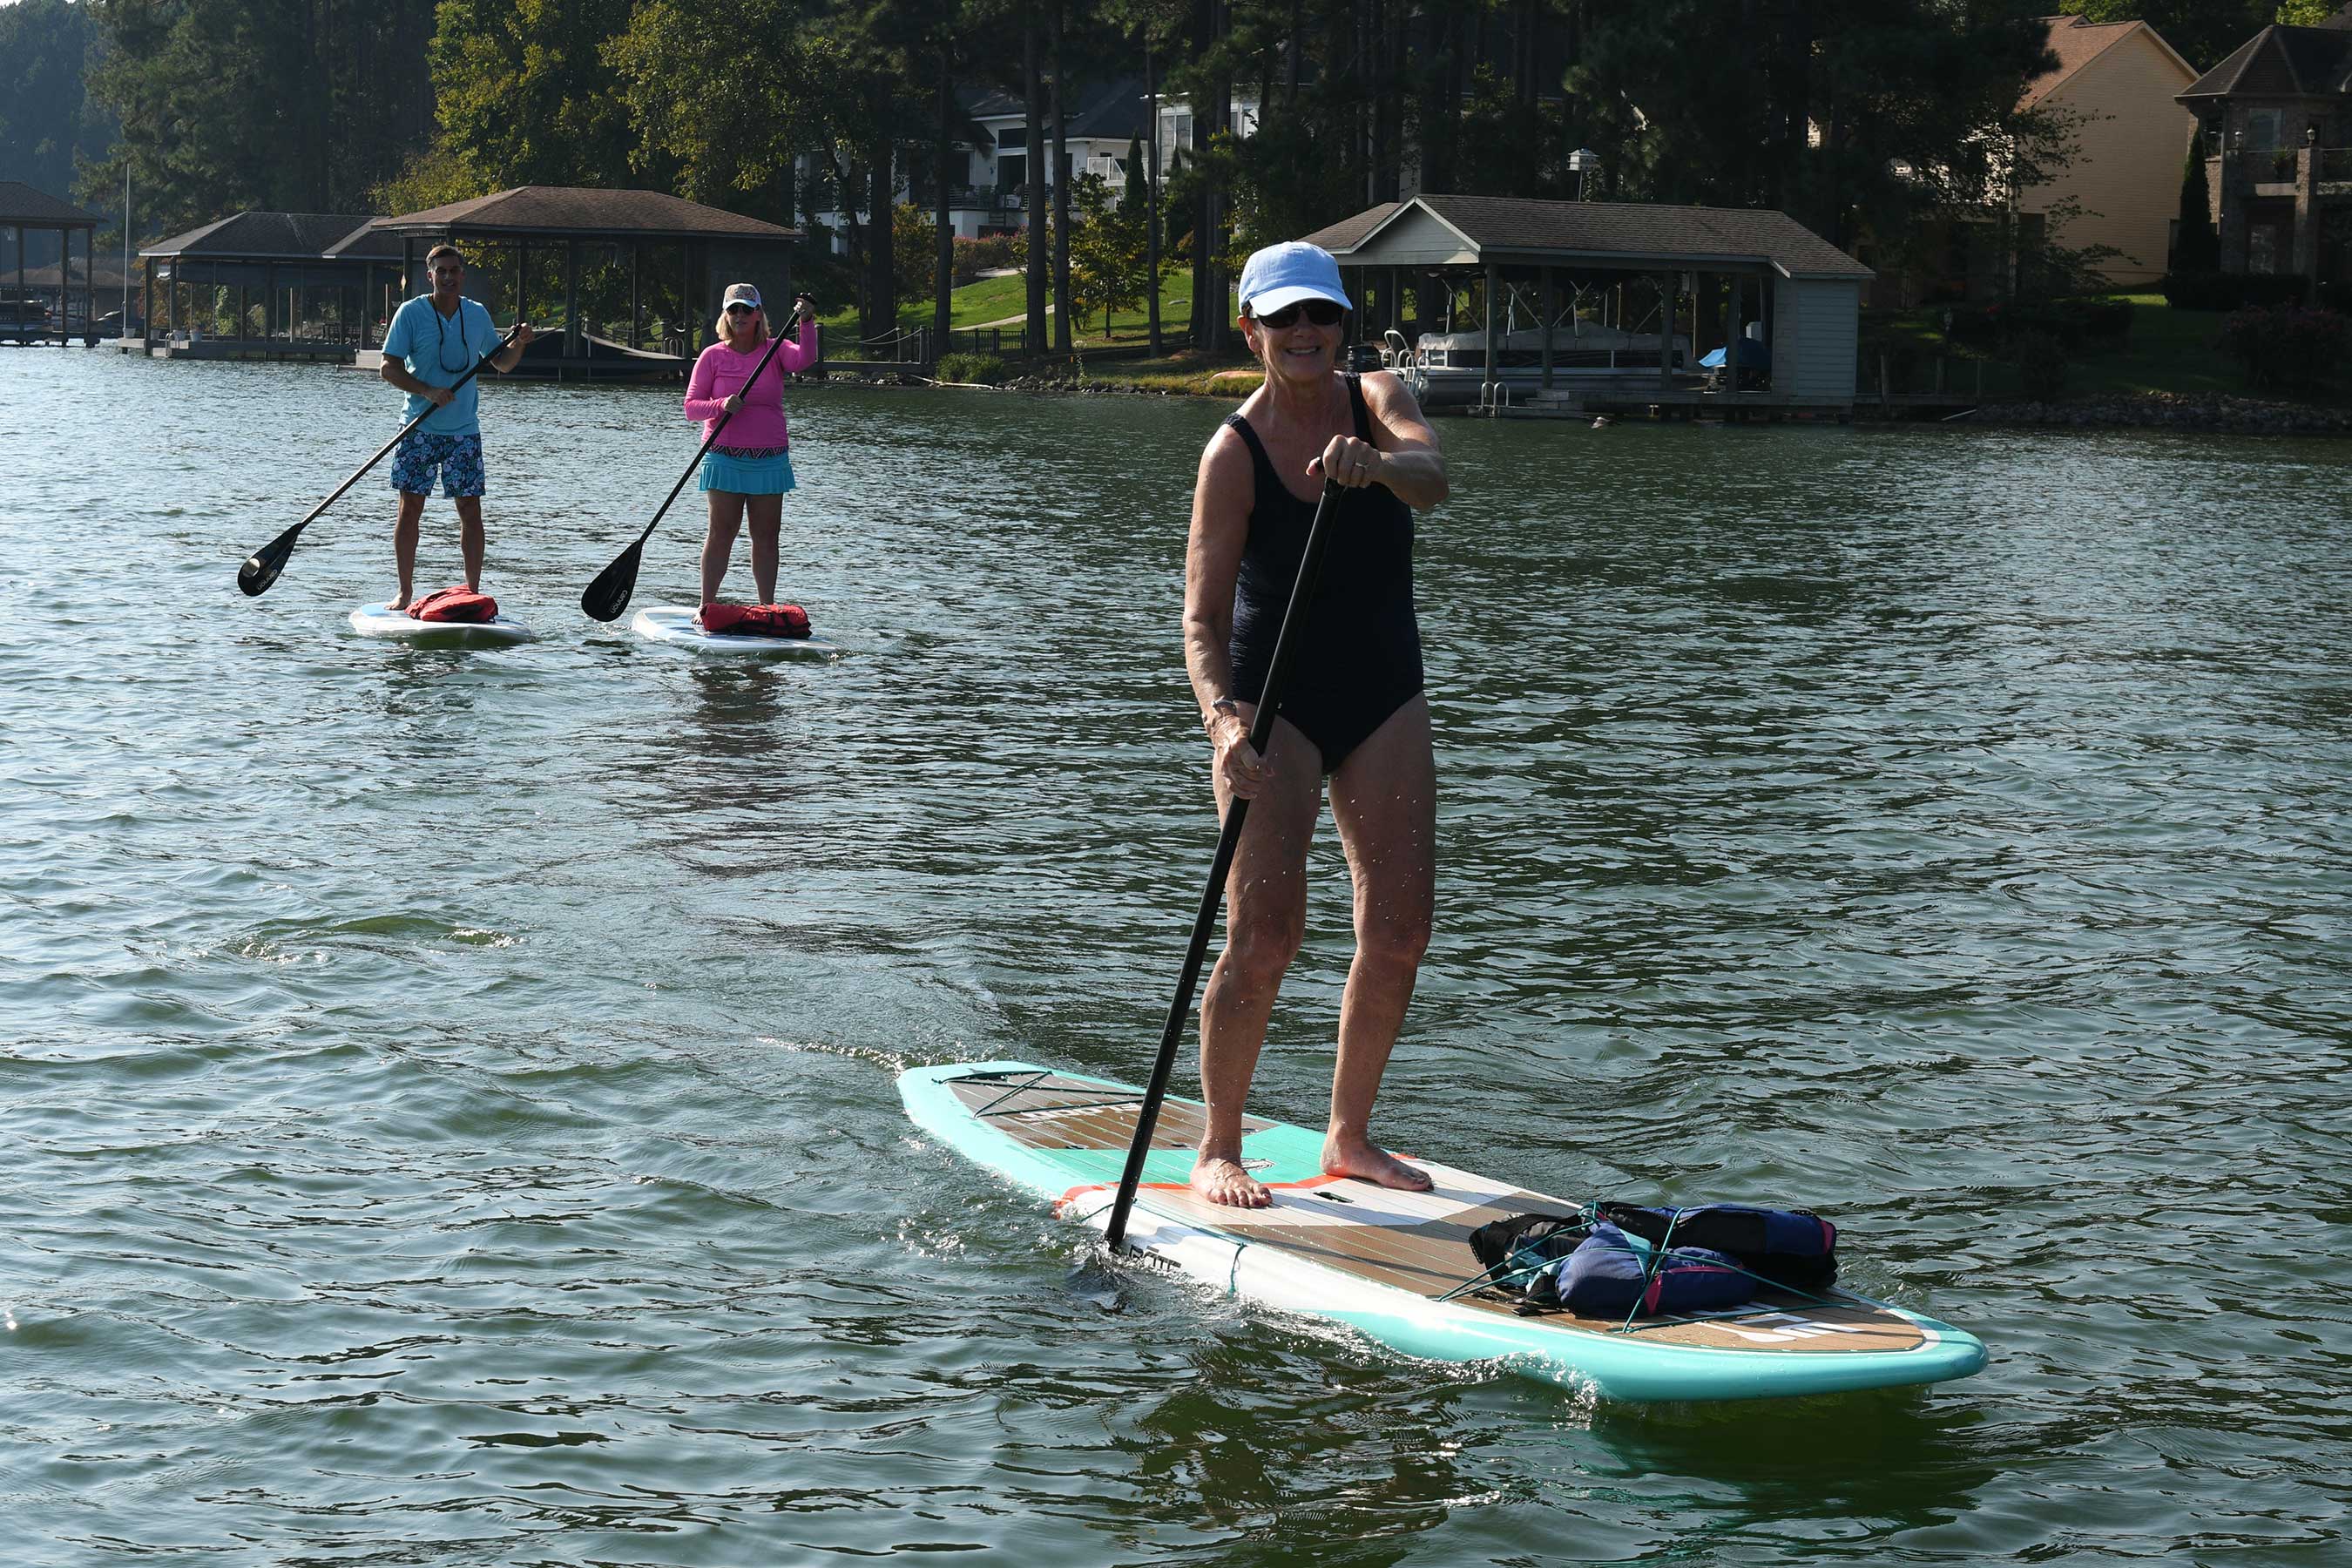 Tellico Village offers wellness activities ranging from yoga, hiking, weight training, pickleball, golf, tennis and water activities like paddle boarding.